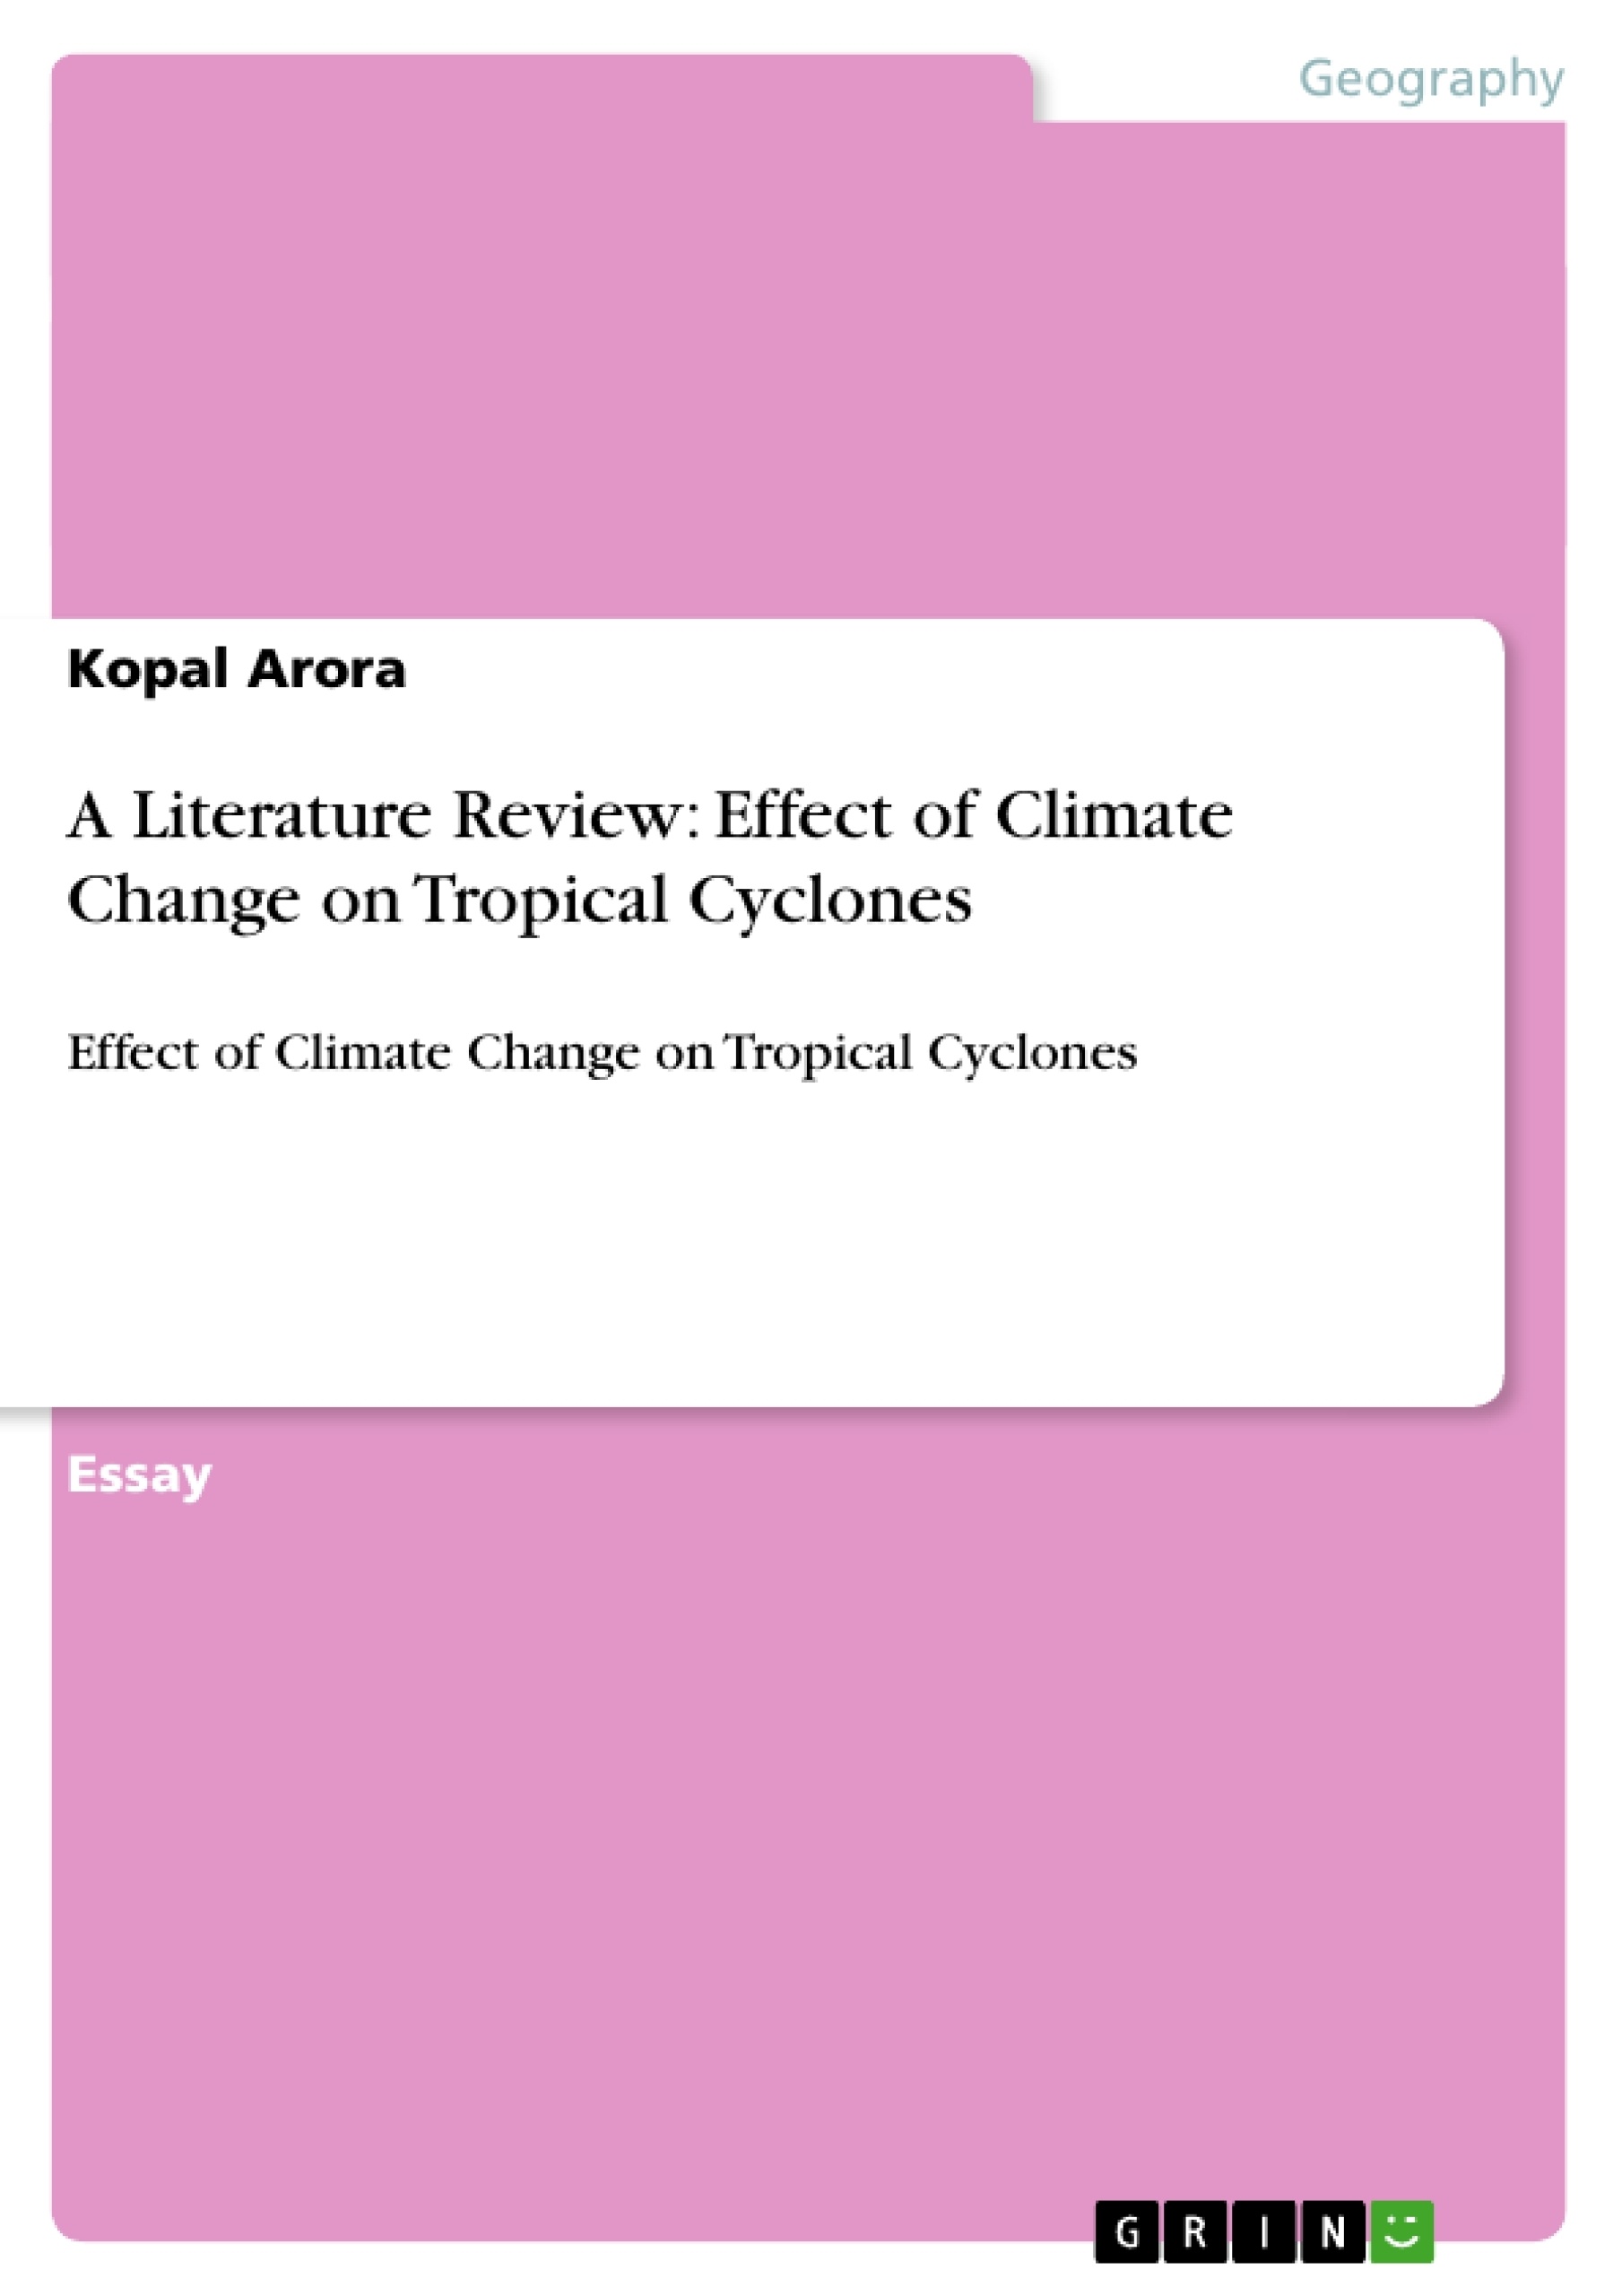 Title: A Literature Review: Effect of Climate Change on Tropical Cyclones